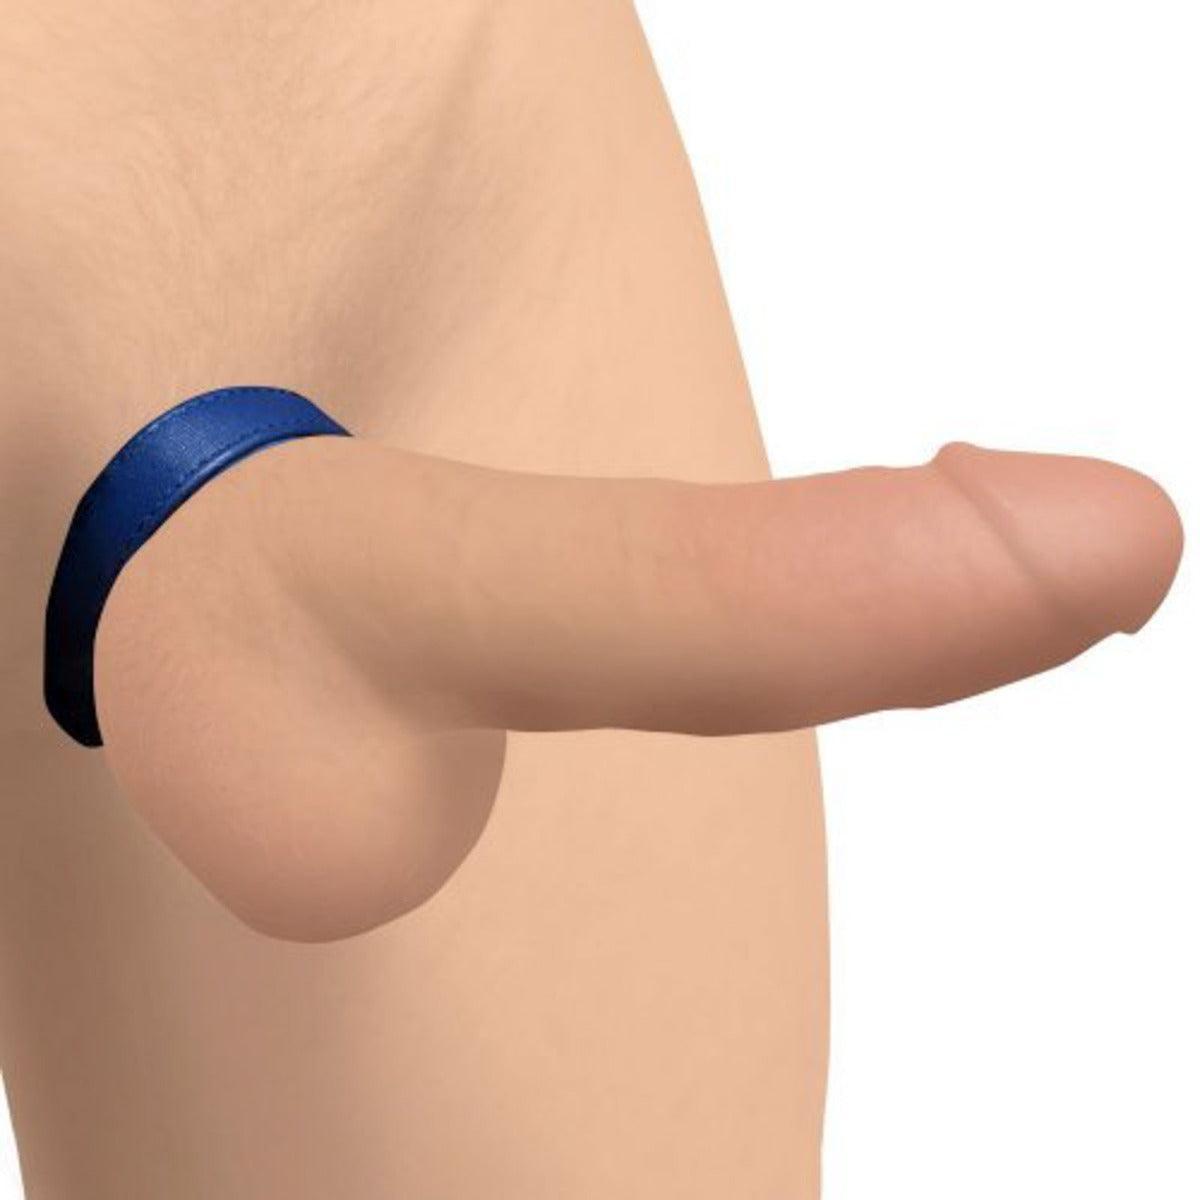 Strict Leather Cock Gear Velcro Cock Ring Blue